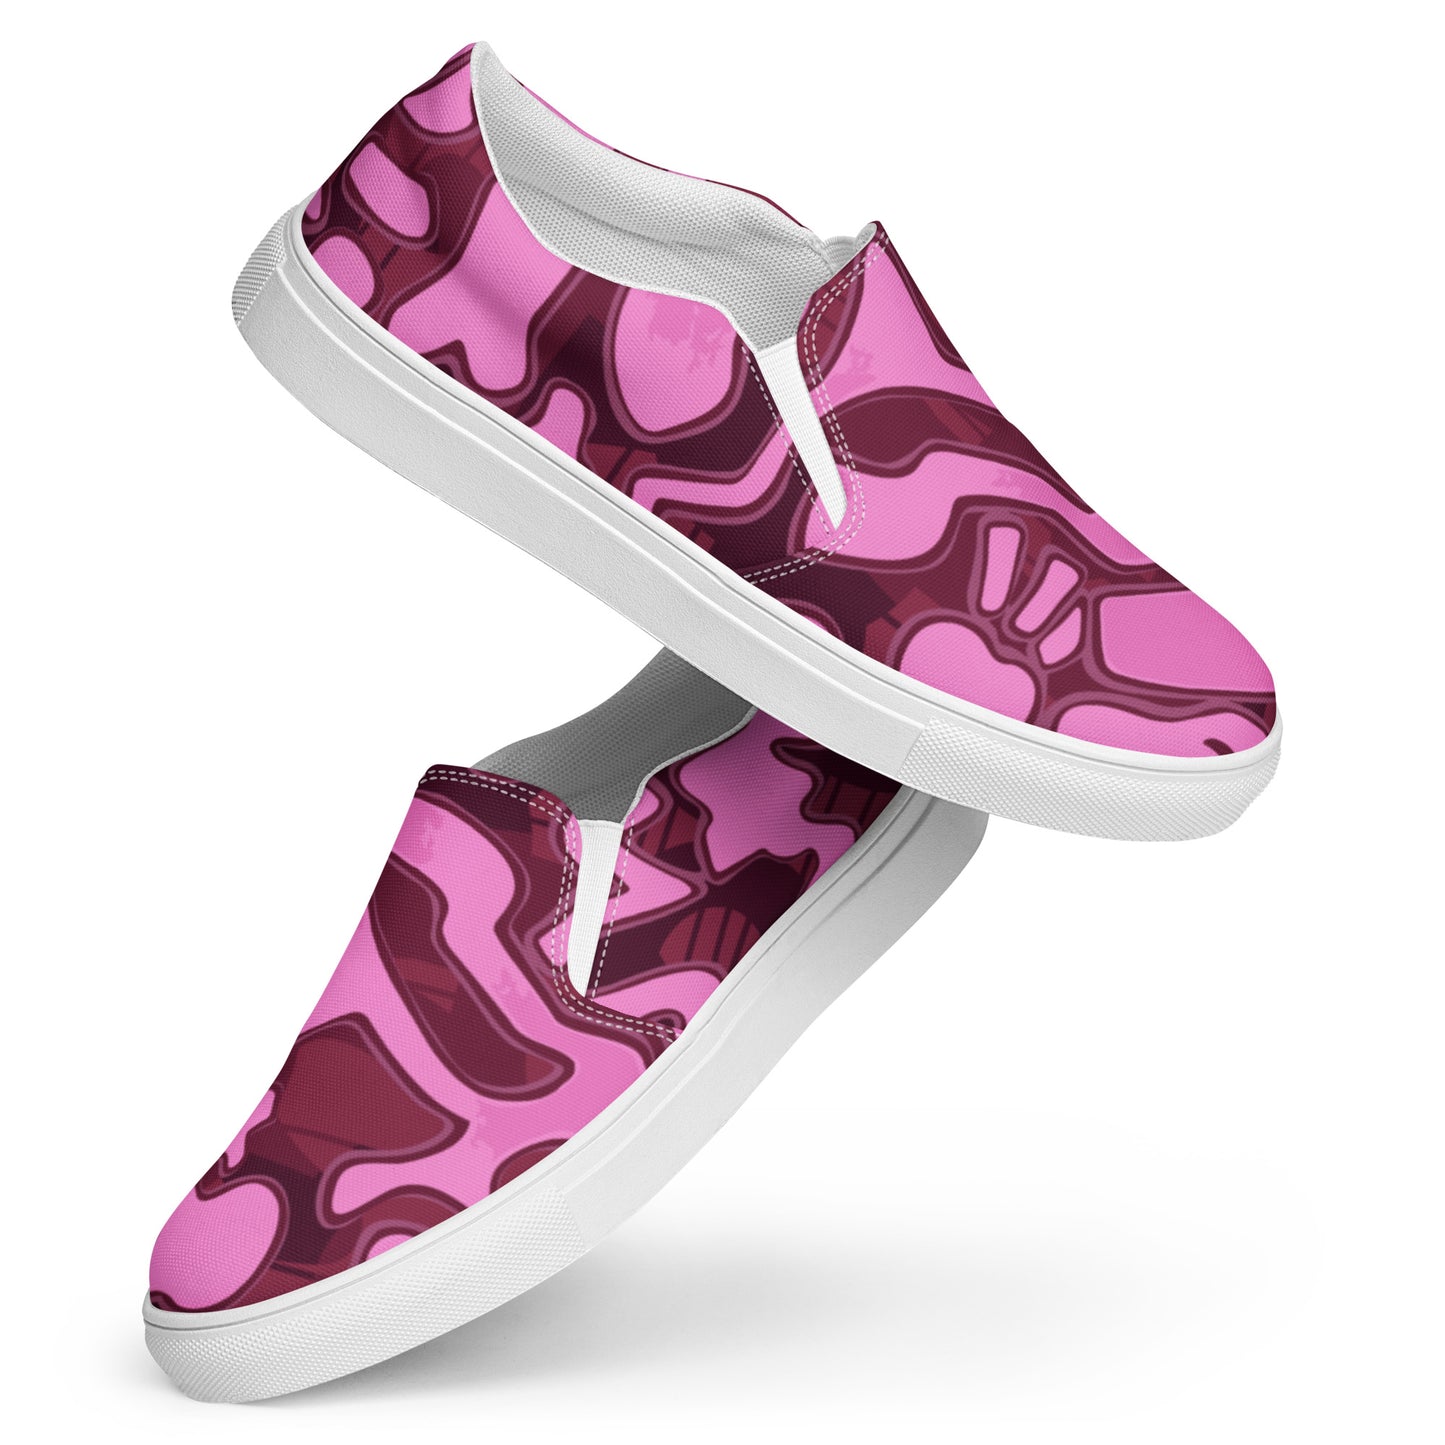 GRAPELY by DOLVING - Women’s slip-on canvas shoes